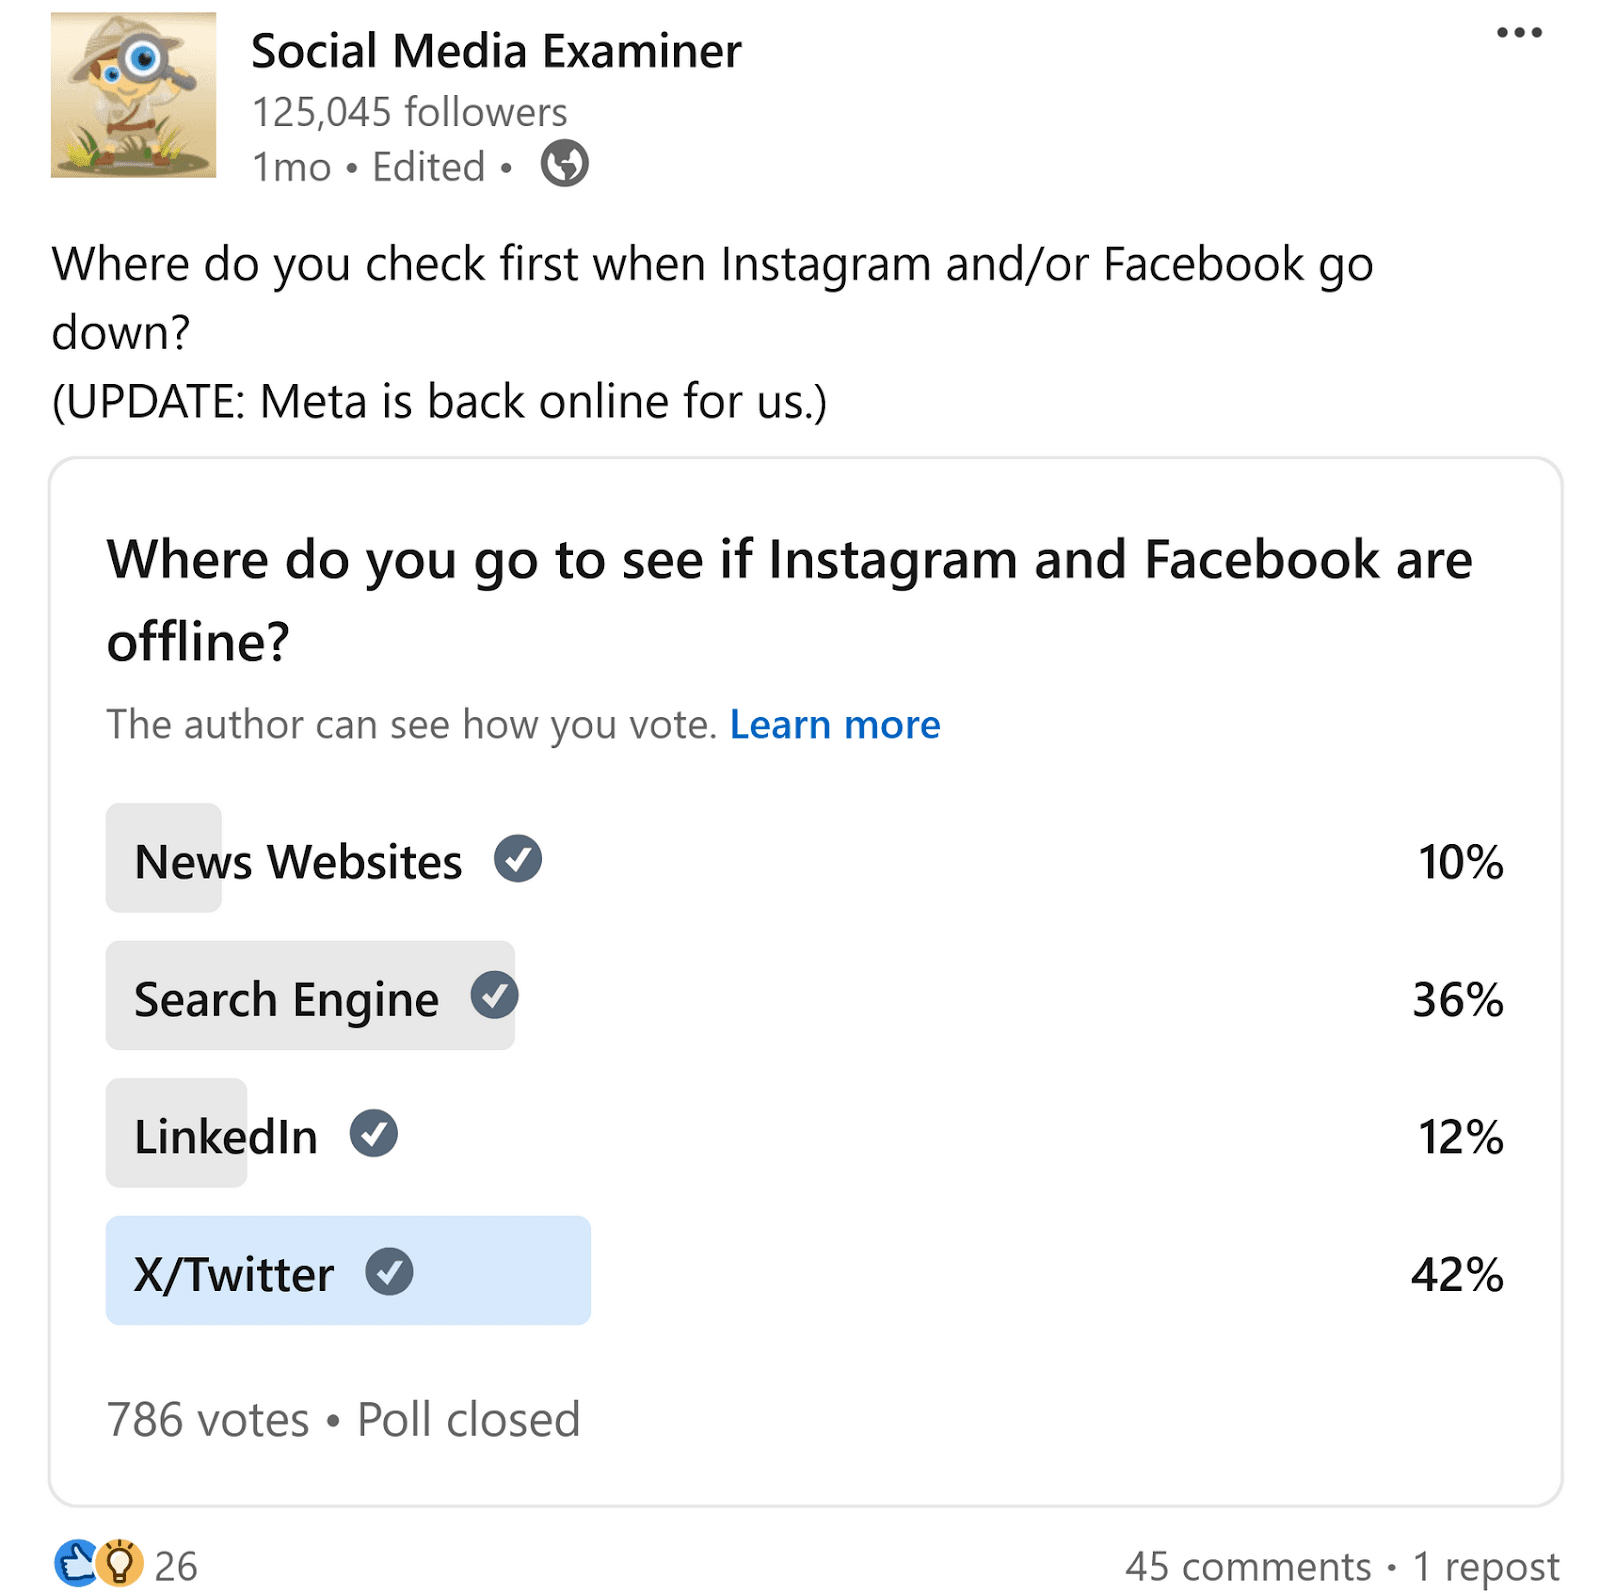 LinkedIn poll by Social Media Examiner asking, "Where do you go to see if Instagram and Facebook are offline?" with results.